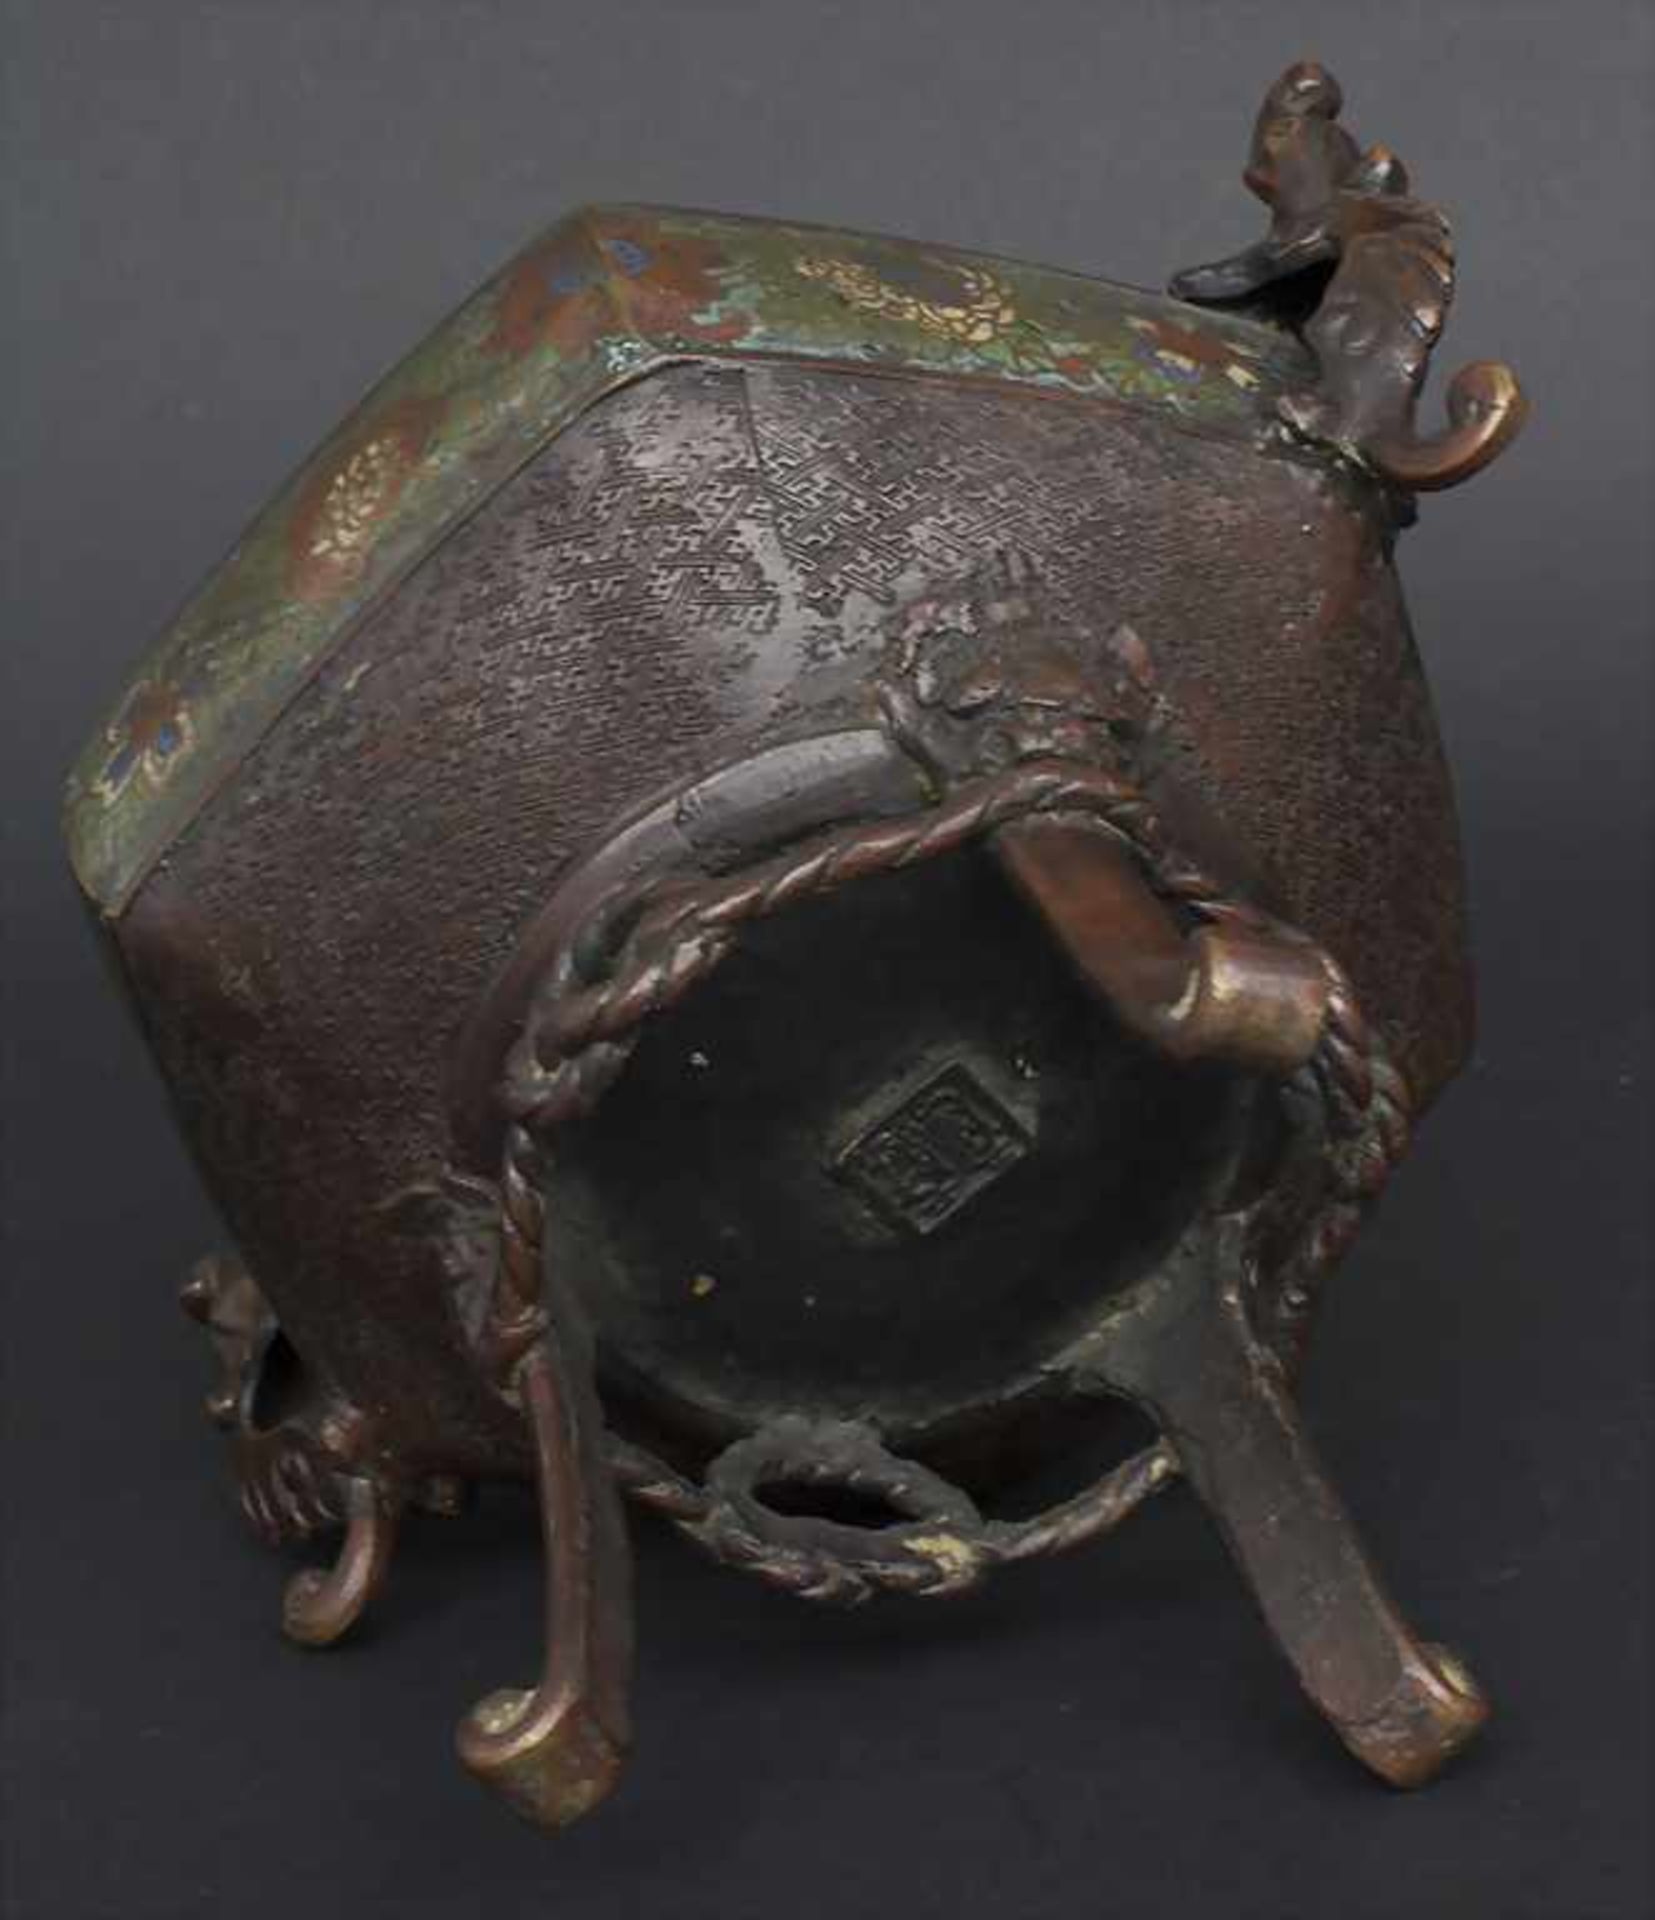 Cloisonné Weihrauchbrenner mit Shishi / A Cloisonné incense burner with Shishi, China, 19. Jh. - Image 7 of 8